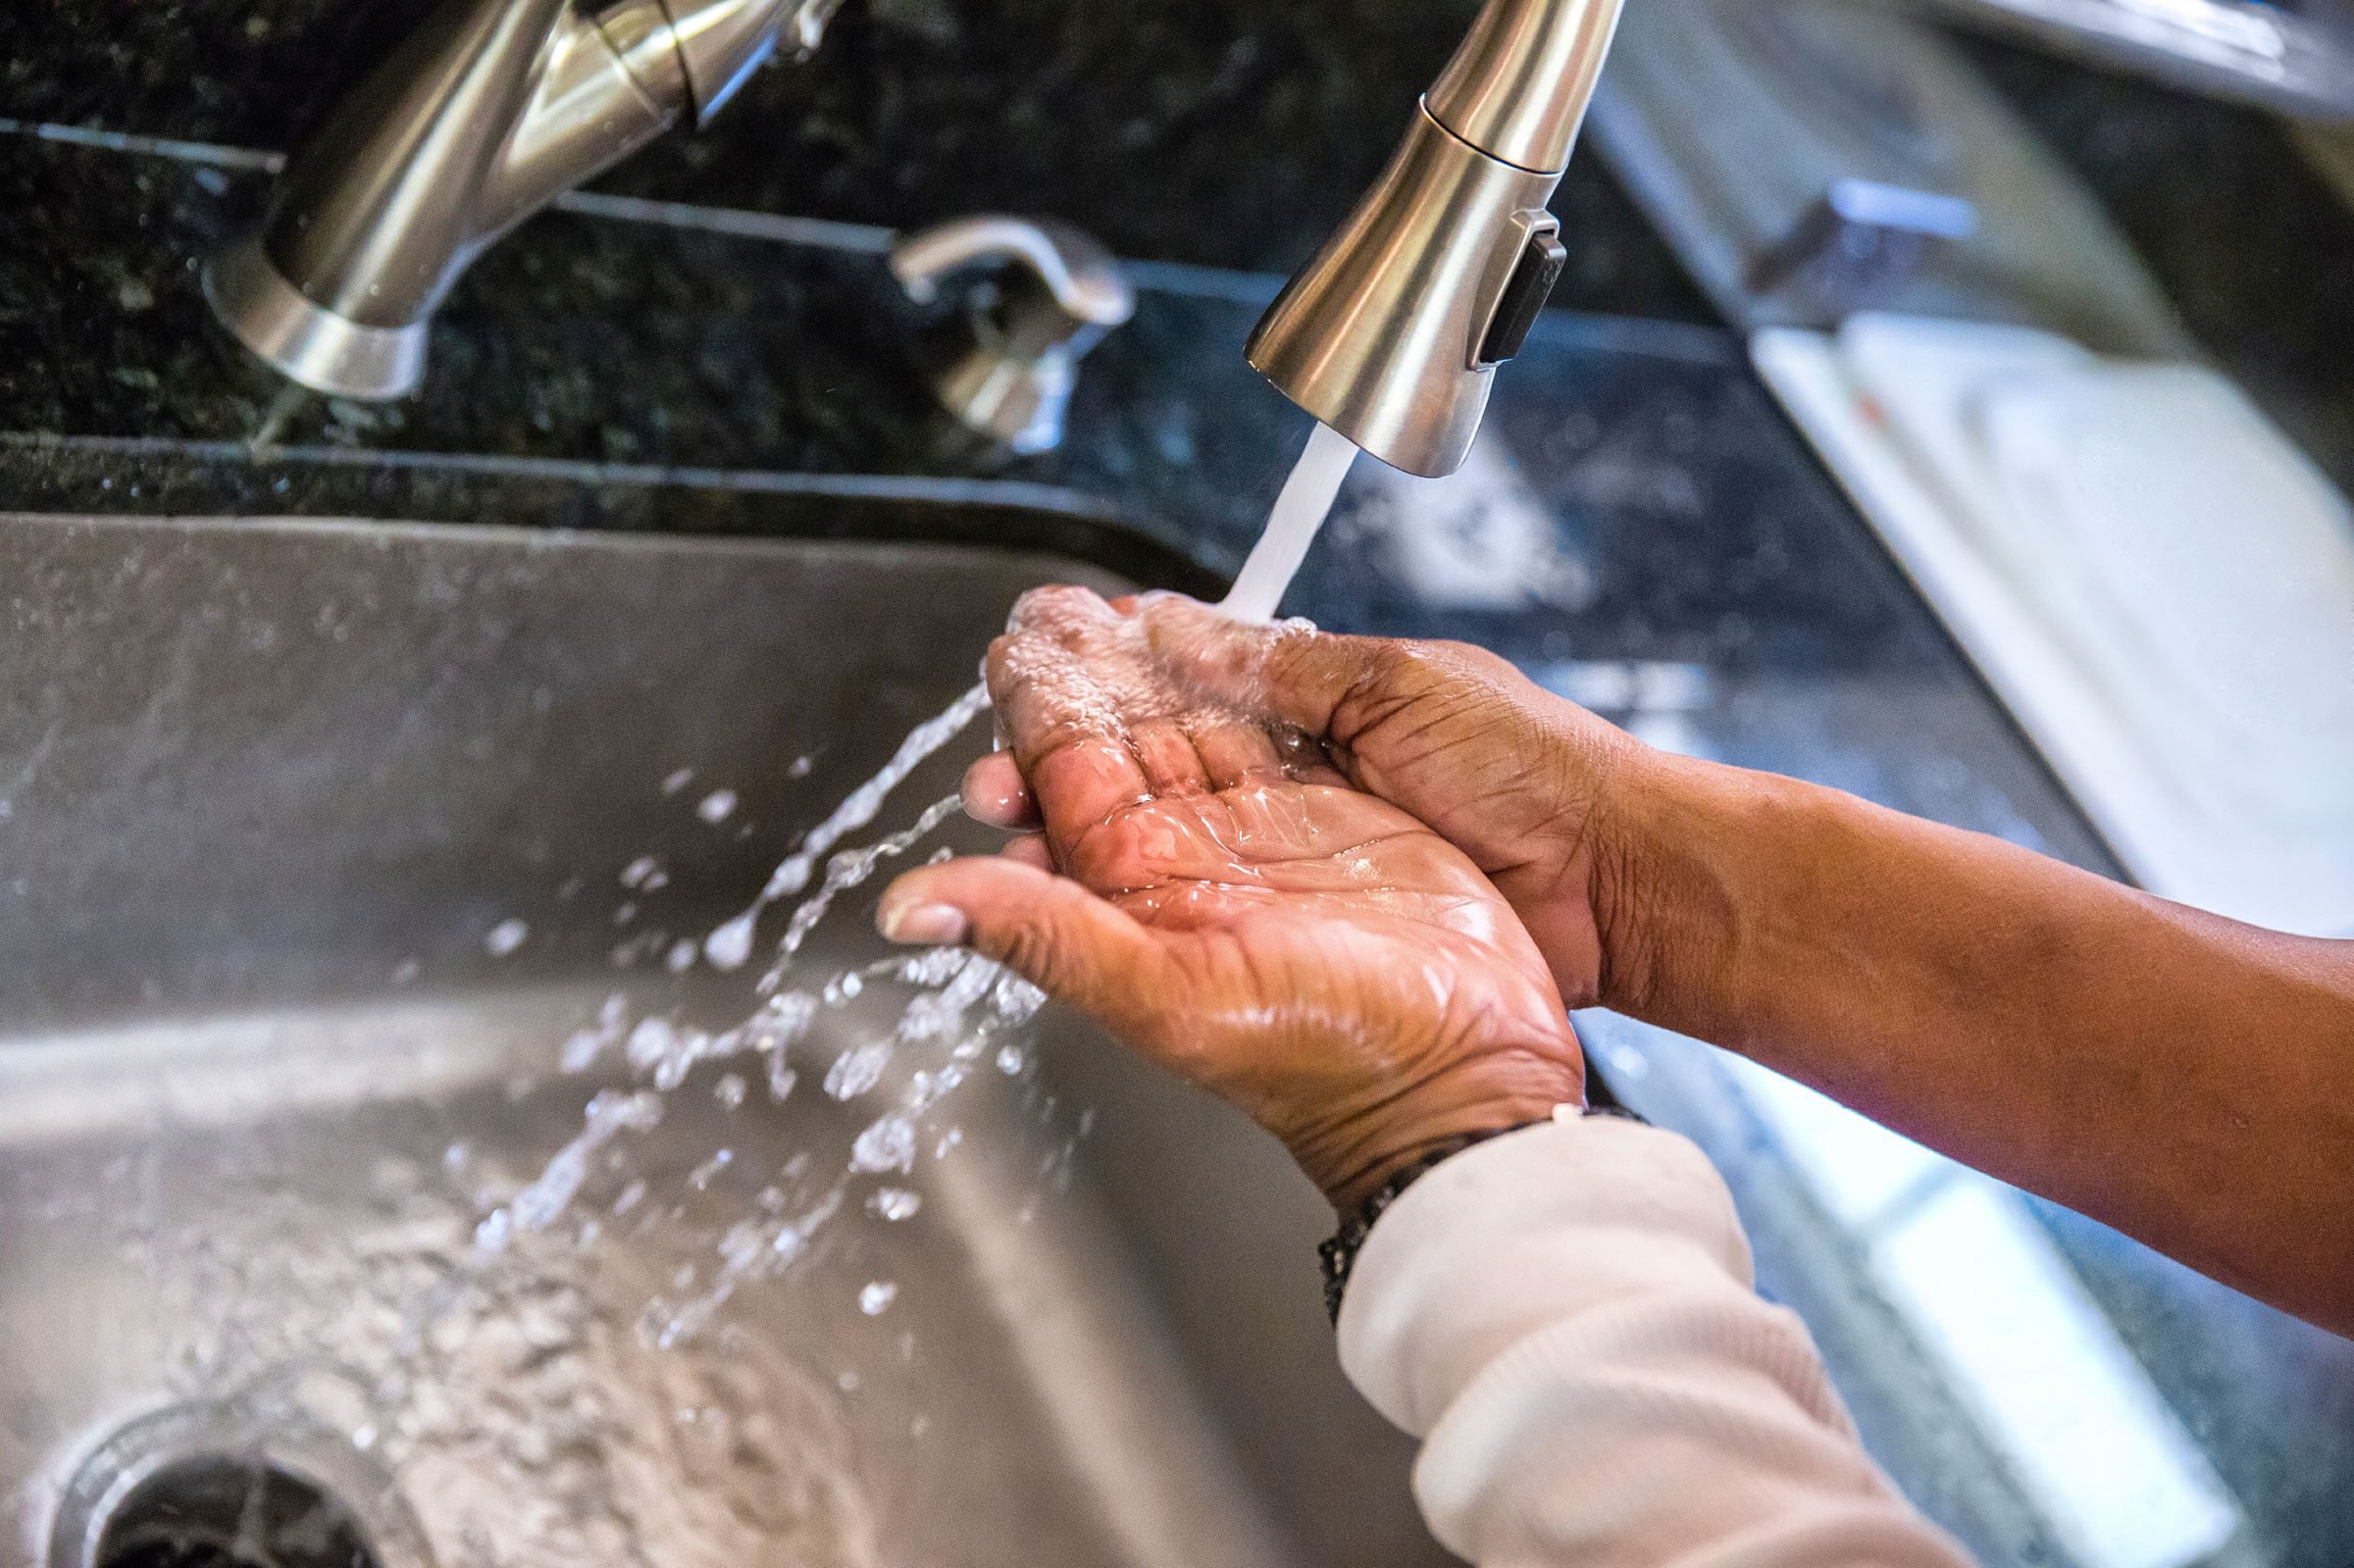 How does washing your hands often benefit your health?